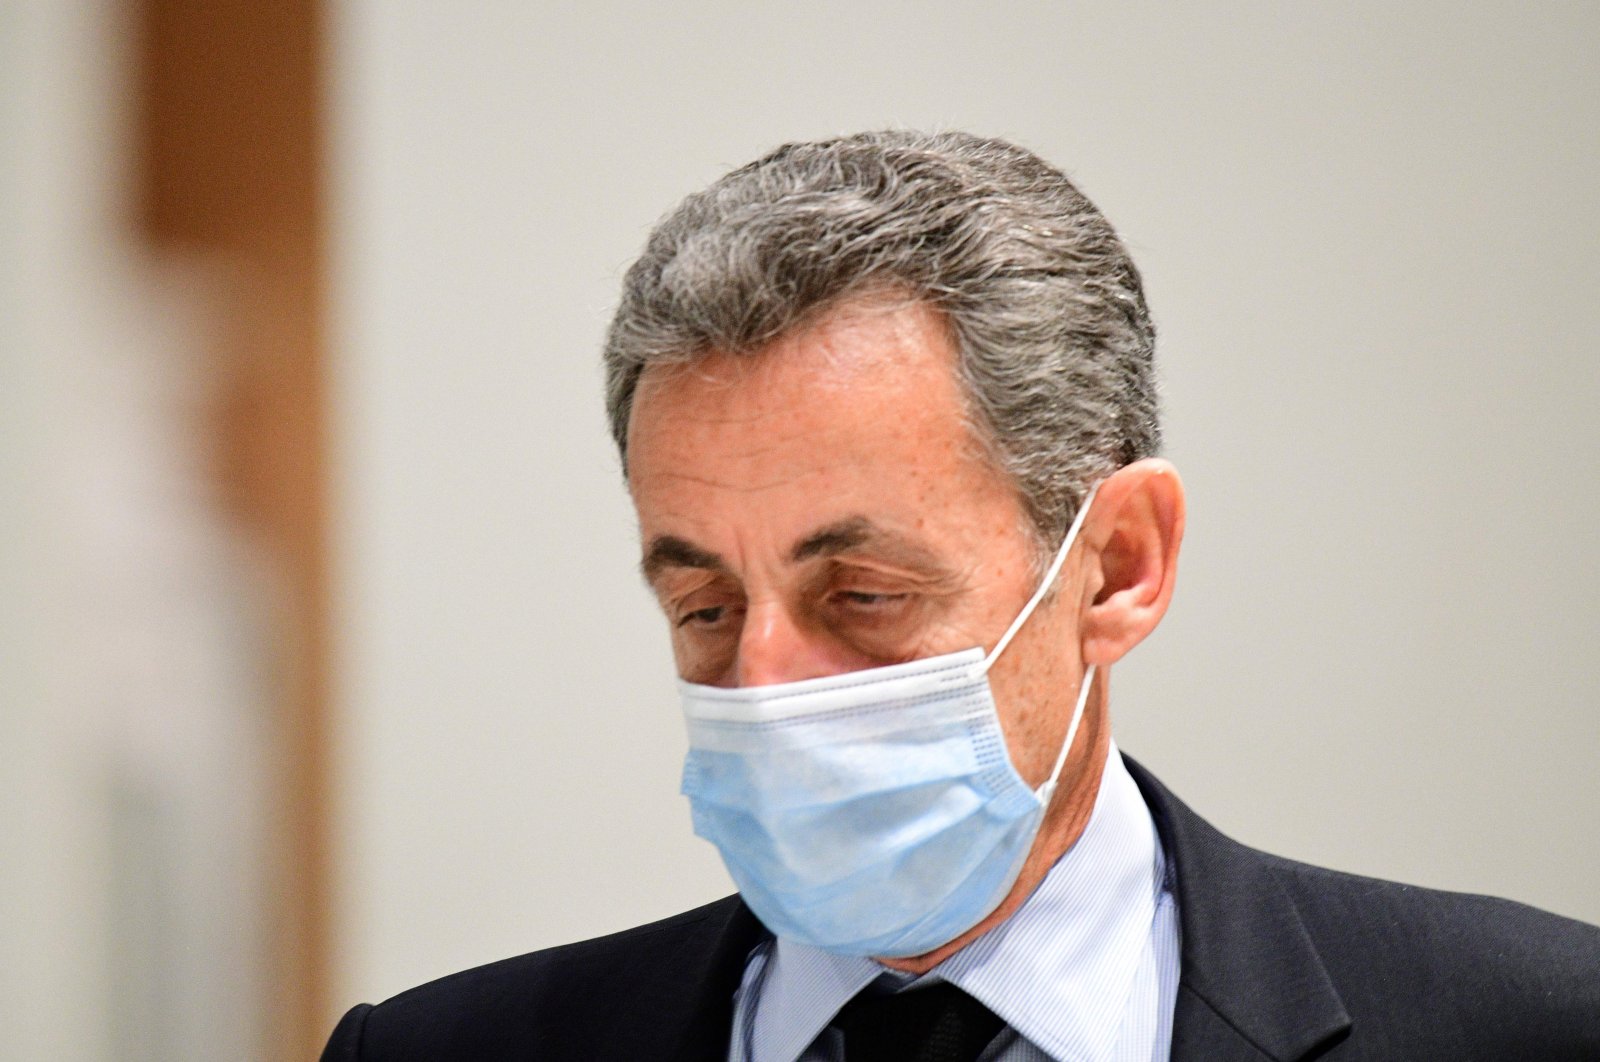 Former French President Nicolas Sarkozy leaves after a hearing during his trial on corruption charges at the courthouse in Paris, Dec. 8, 2020. (AFP Photo)